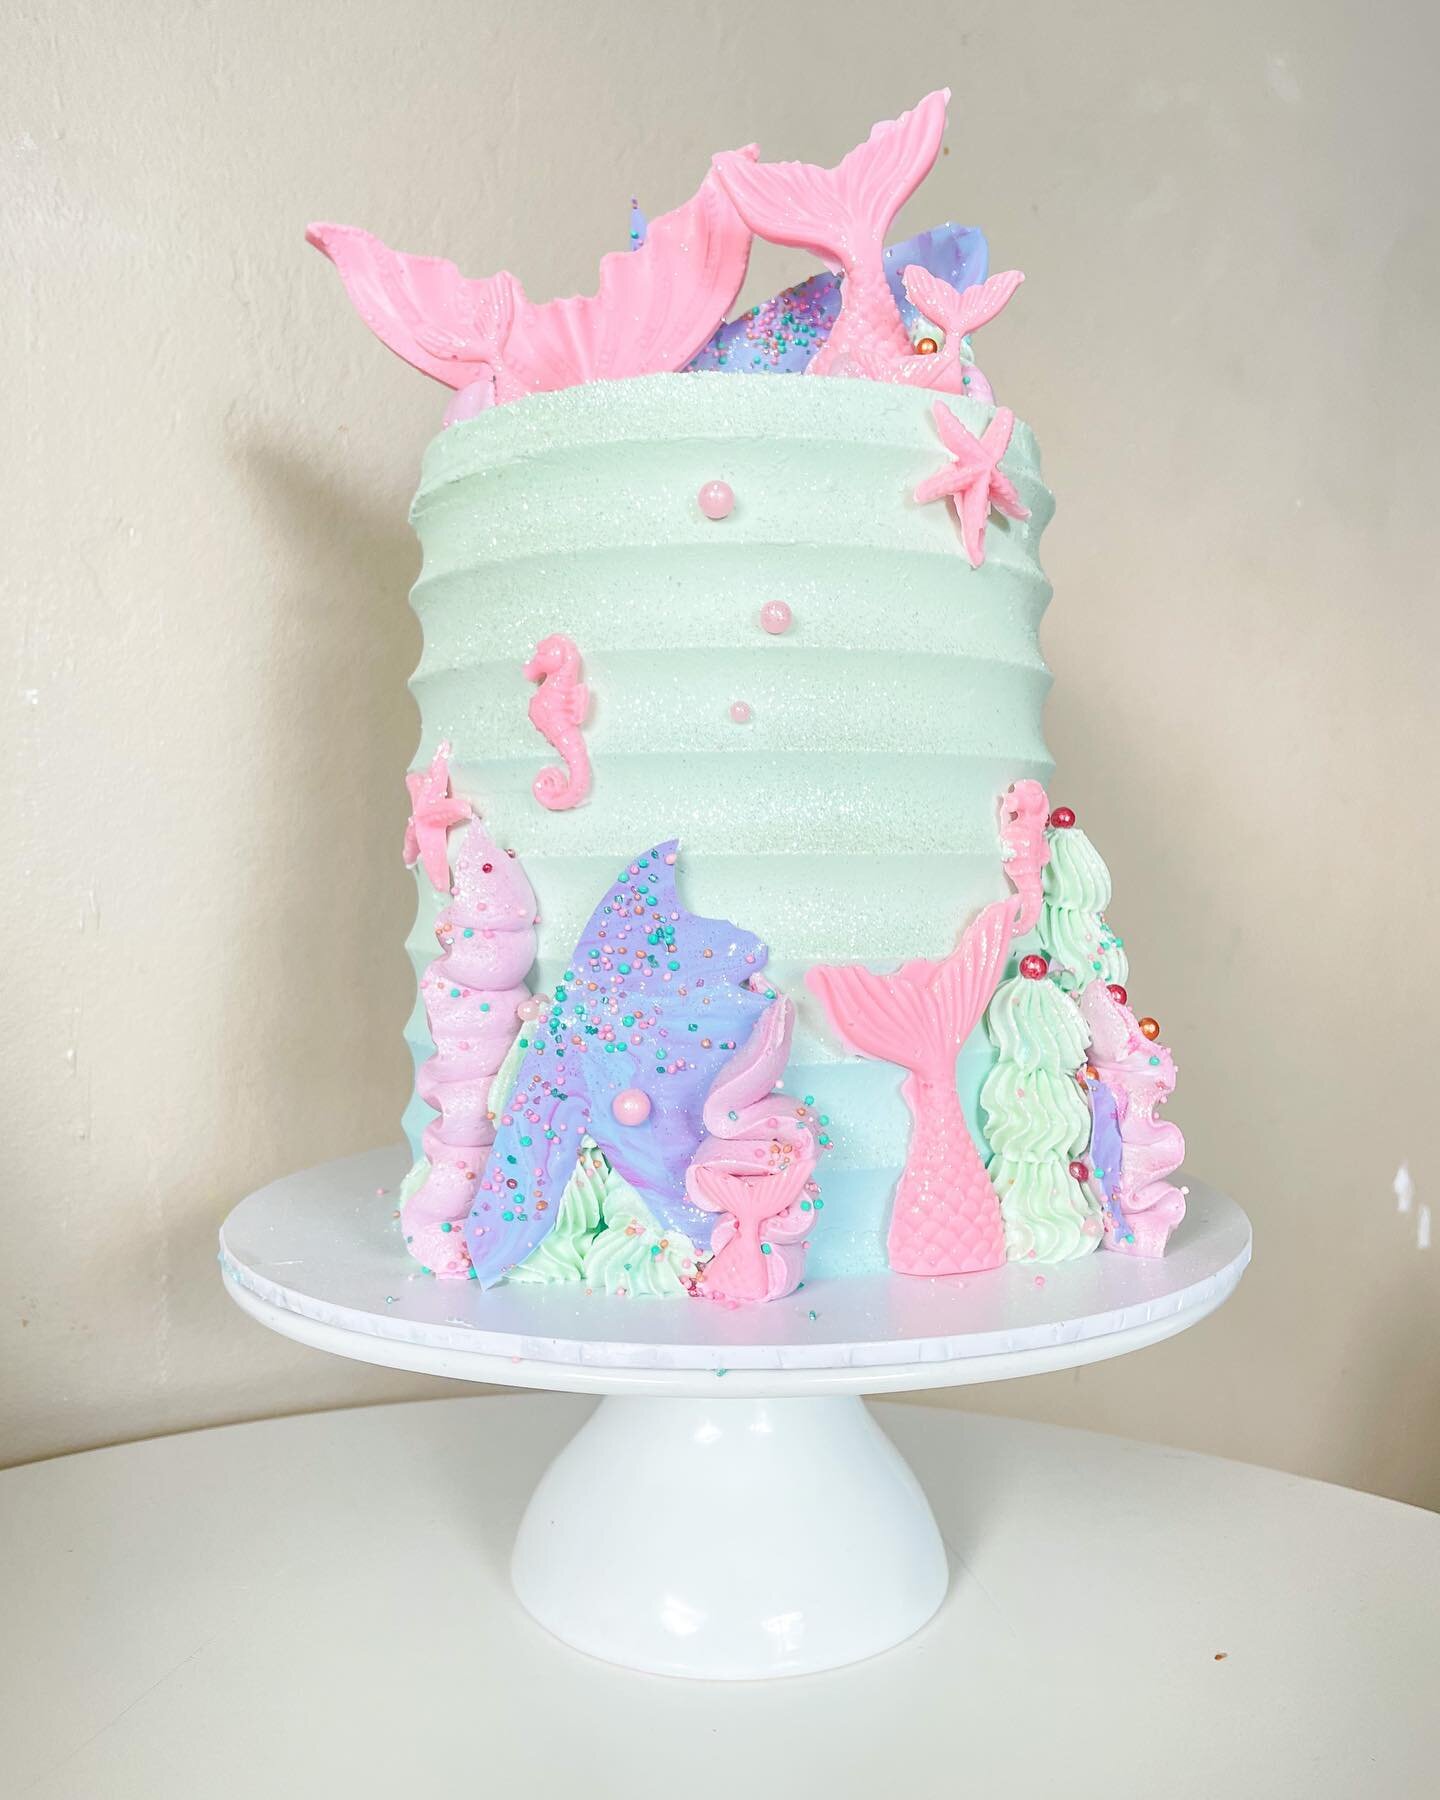 Another Last Minute Cake &hellip; Ordered from Auckland for a Special Gals Birthday Today! 

#mermaidcake